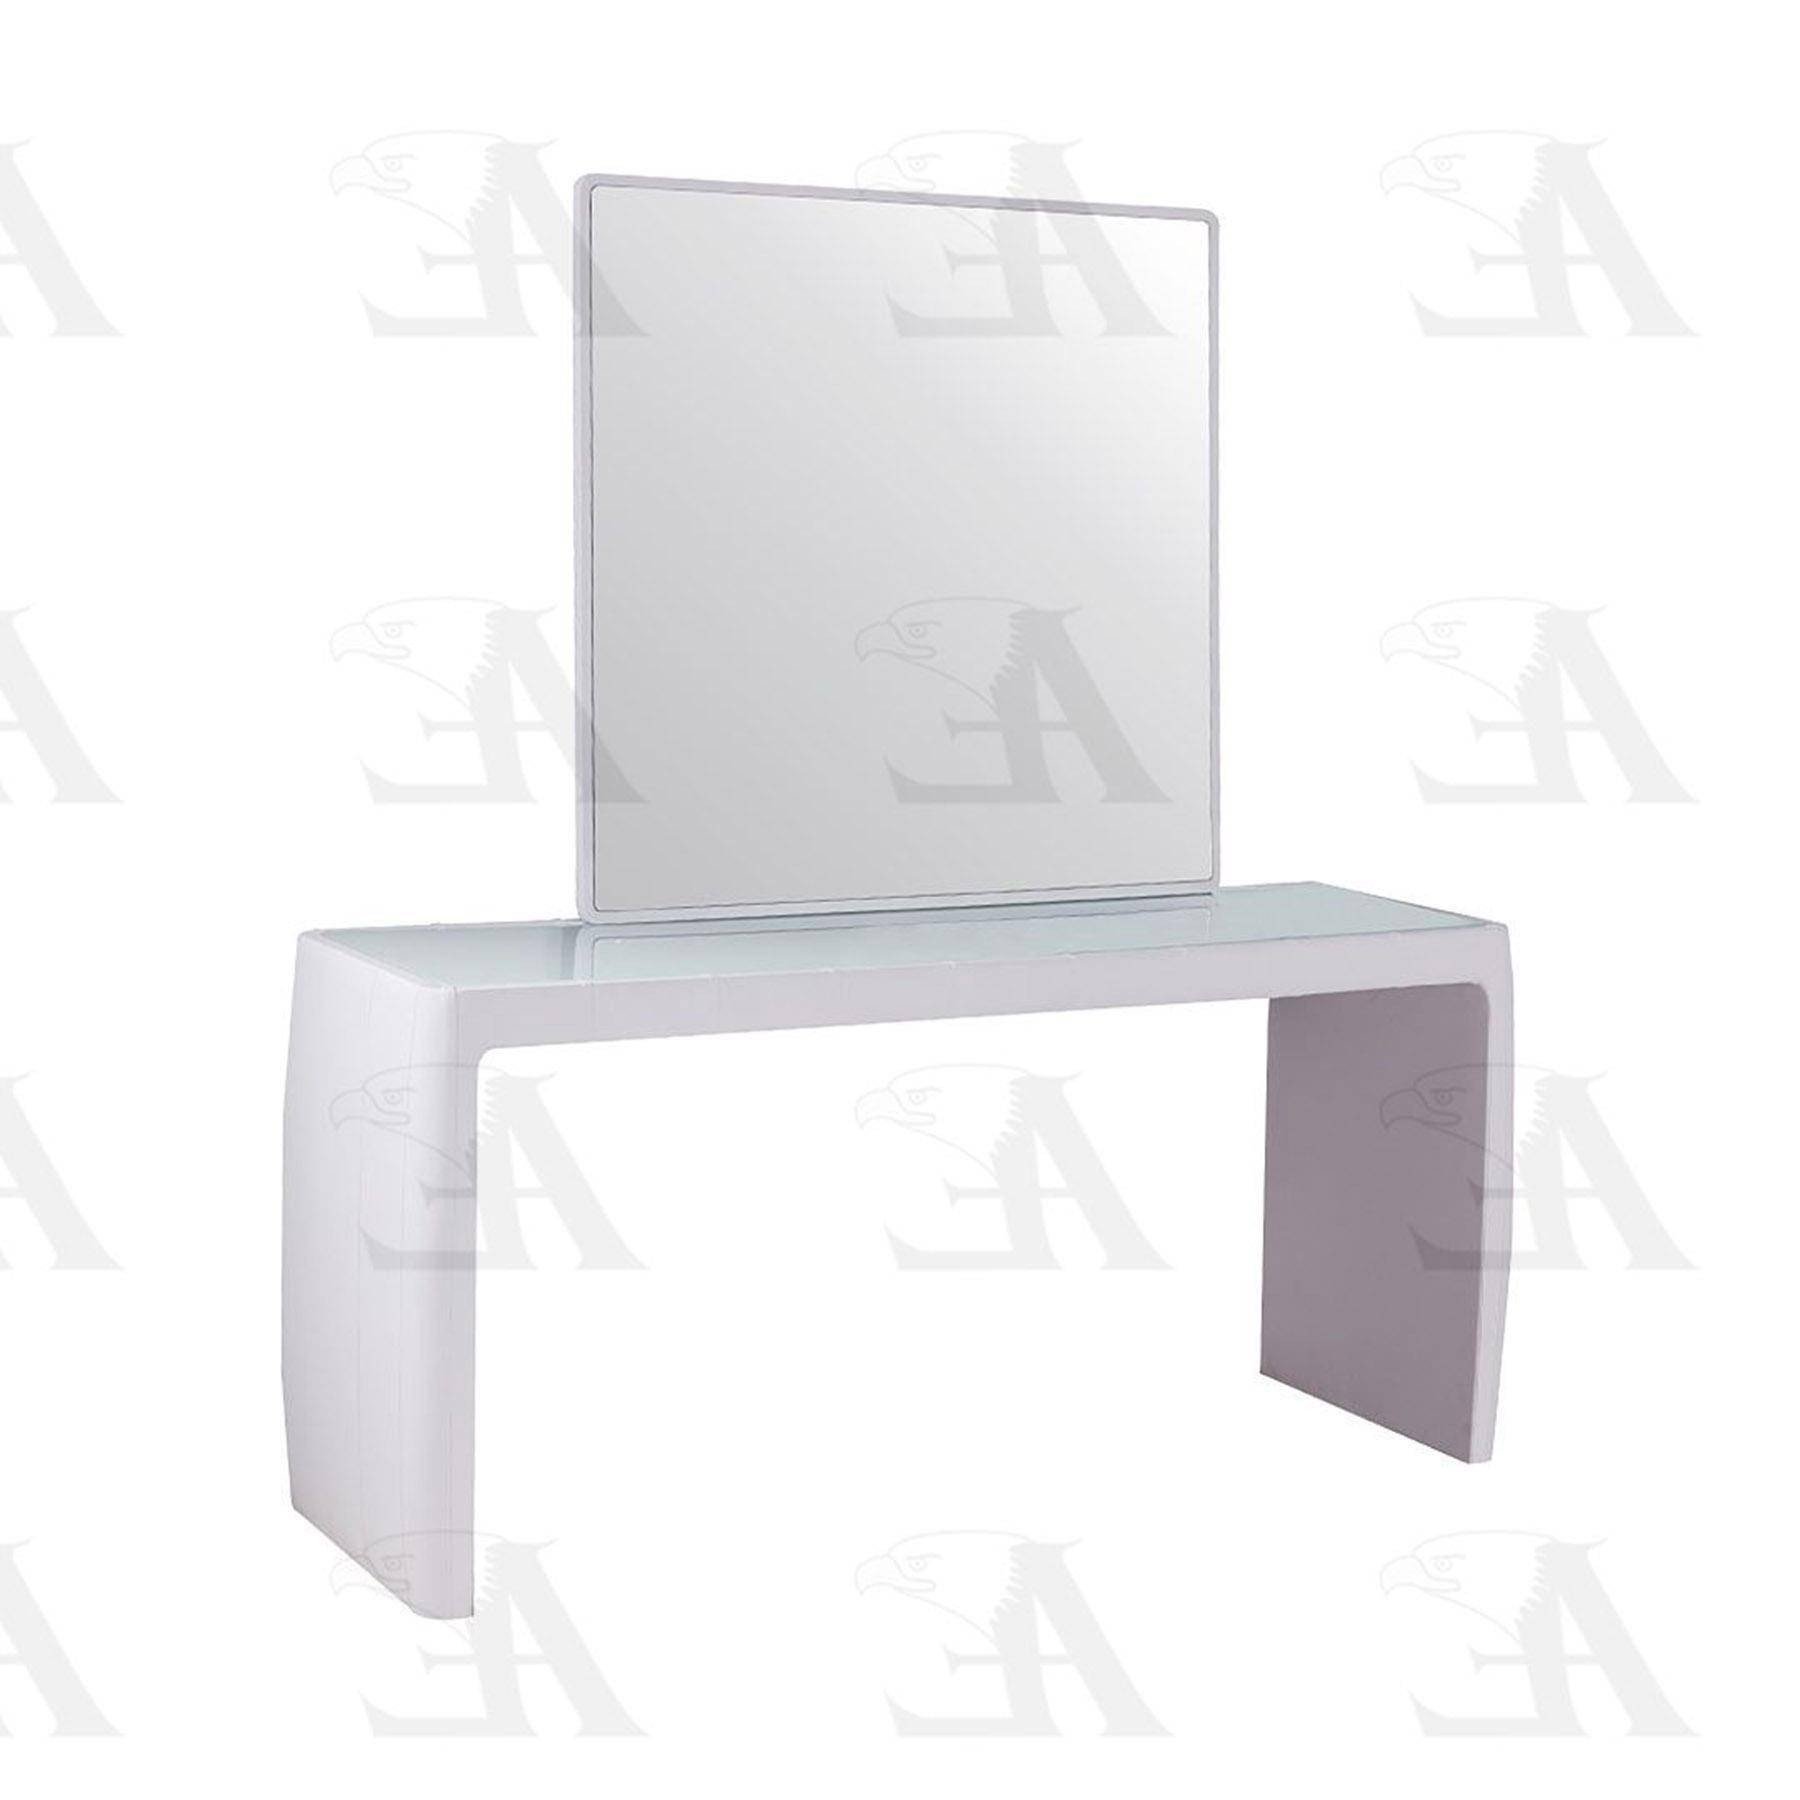 Bedroom Vanities for Sale Best Of American Eagle Furniture Jt027 W White Pu Vanity with Stool